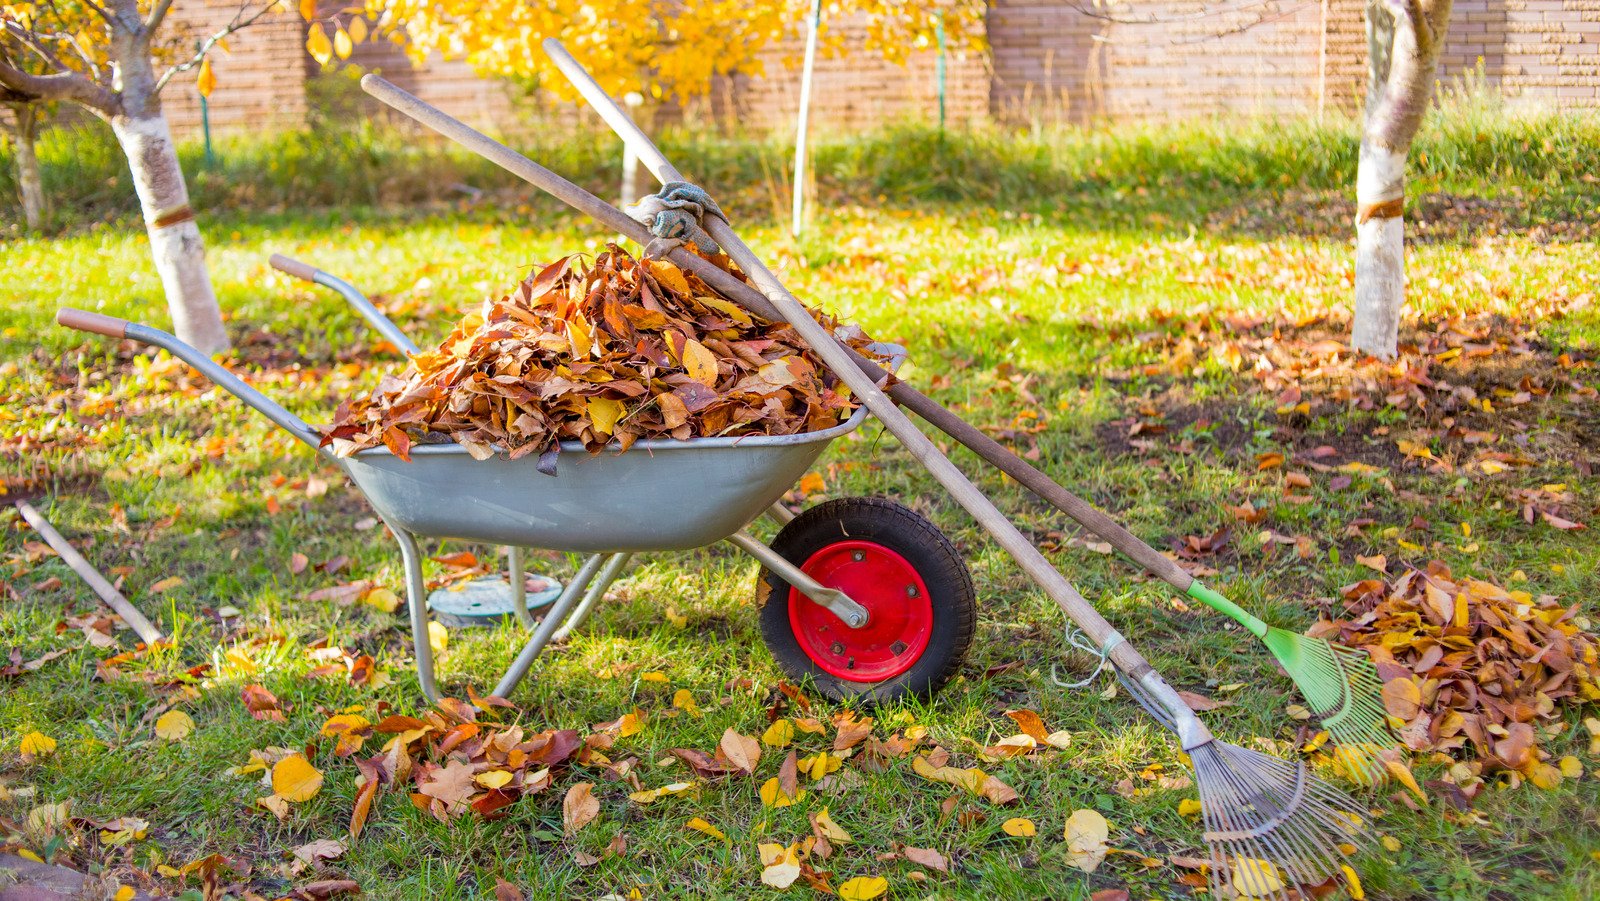 5 Tips For Caring For Your Lawn This Fall